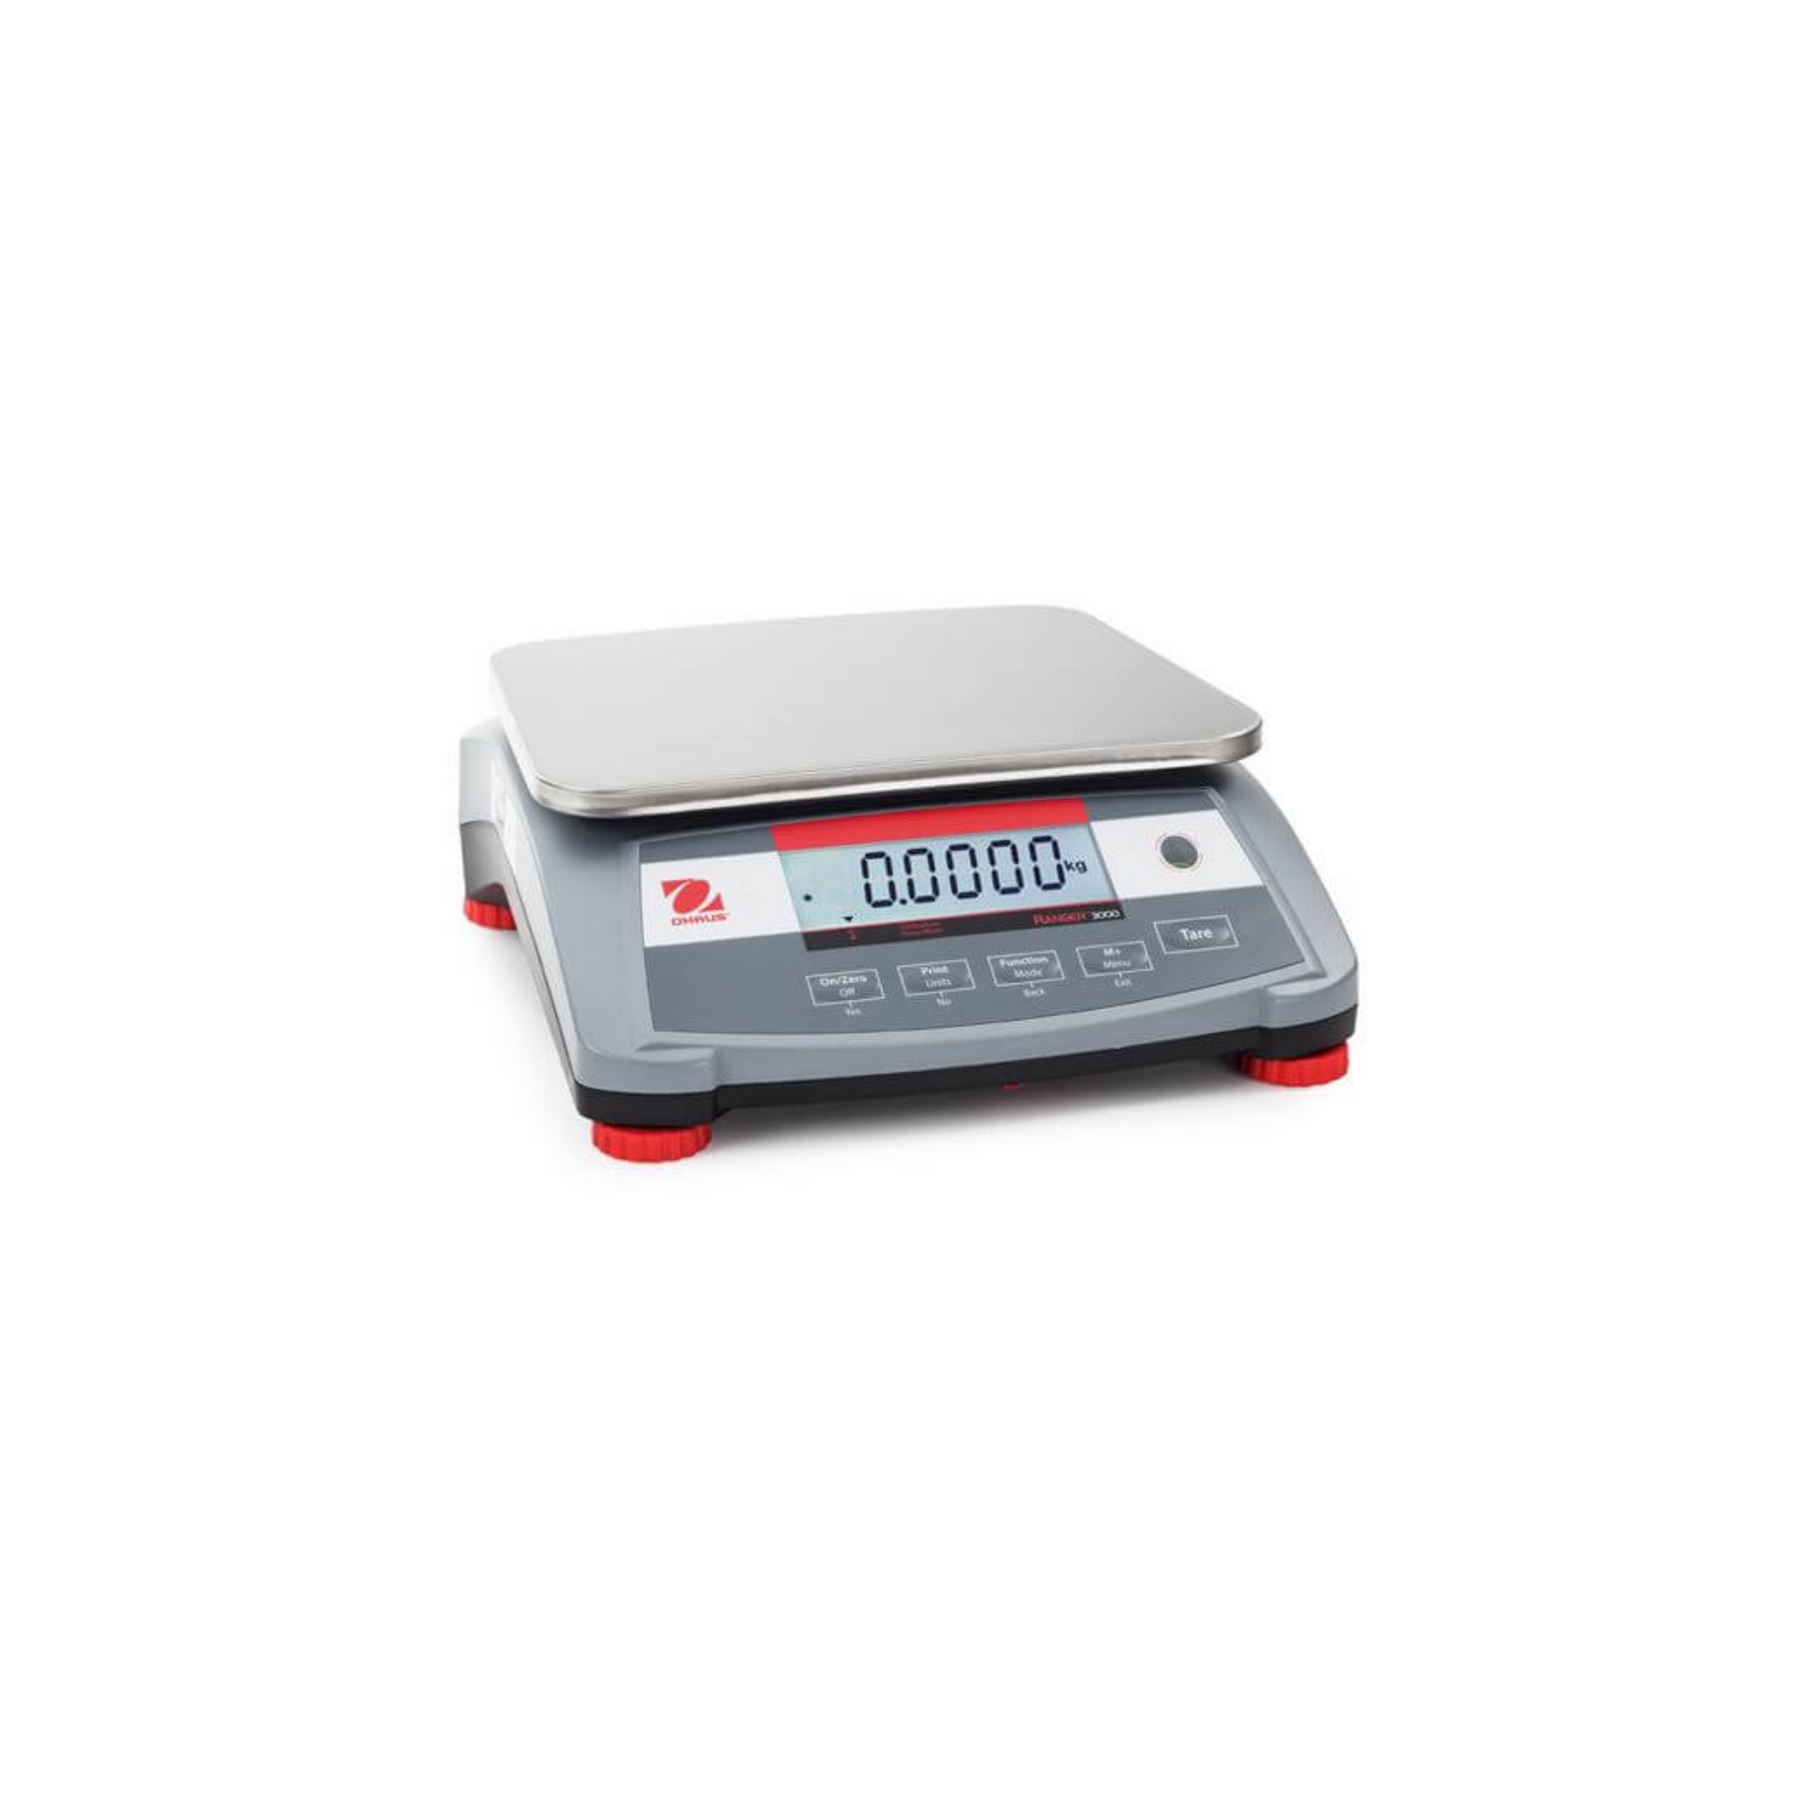 [Single Plant Weighing] Ohaus scale, Ranger 3000, 6 lb capacity